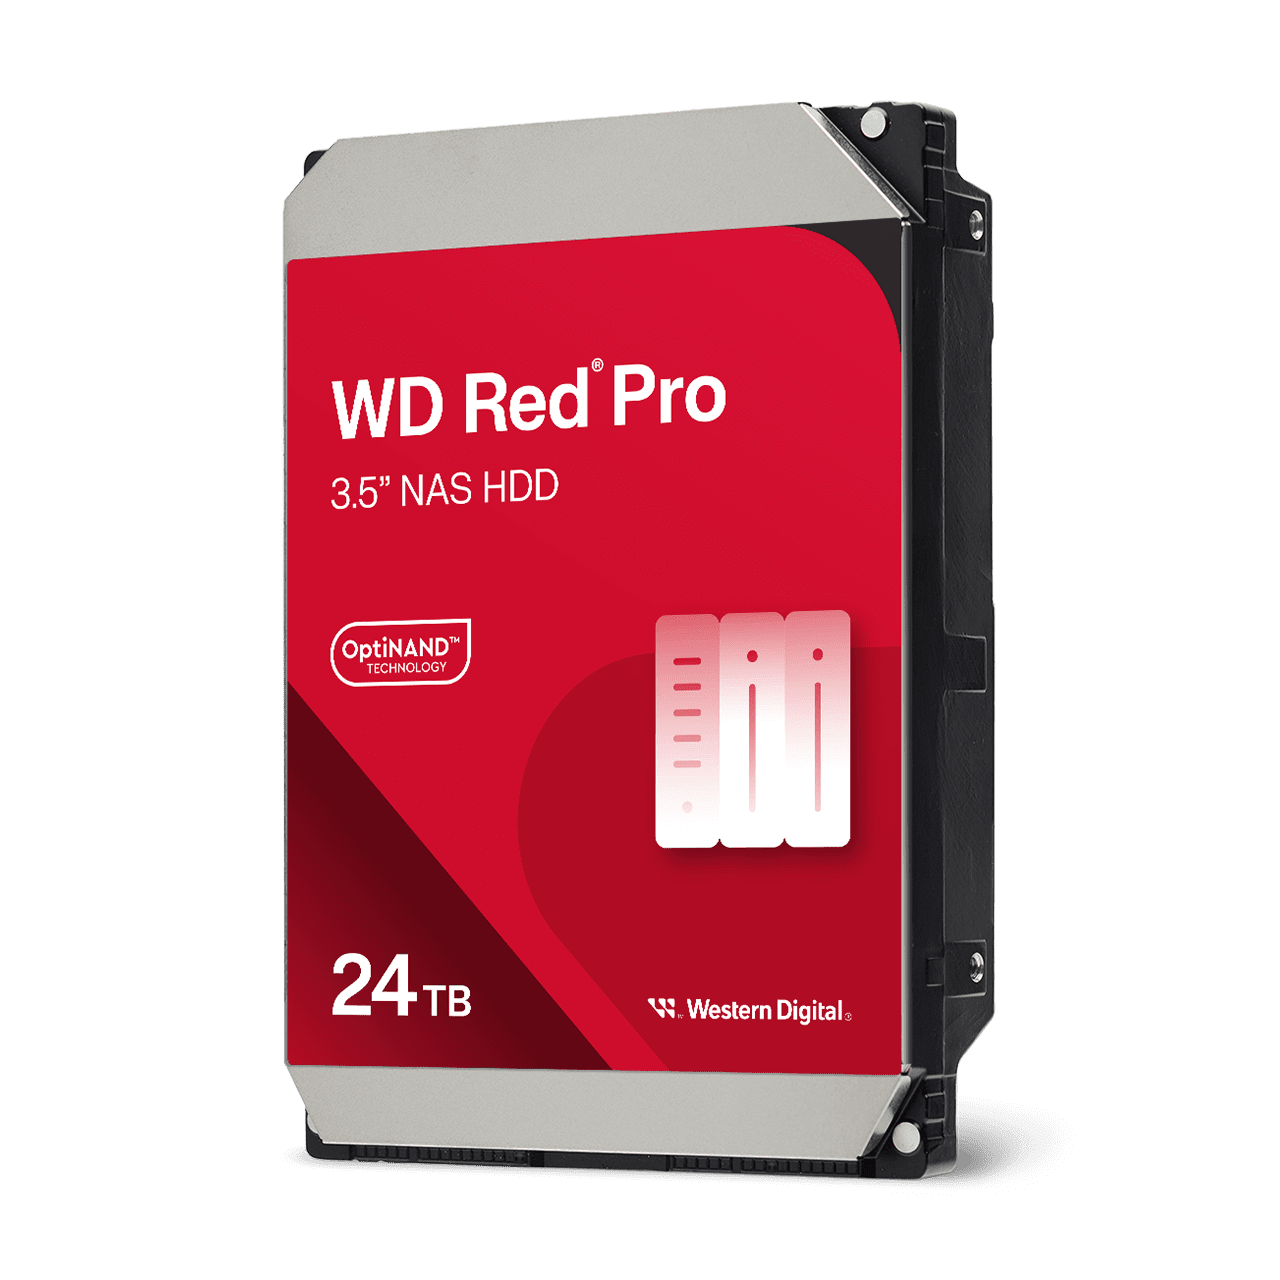 WD Red™ Pro 24TB NAS Hard Drive - Image12